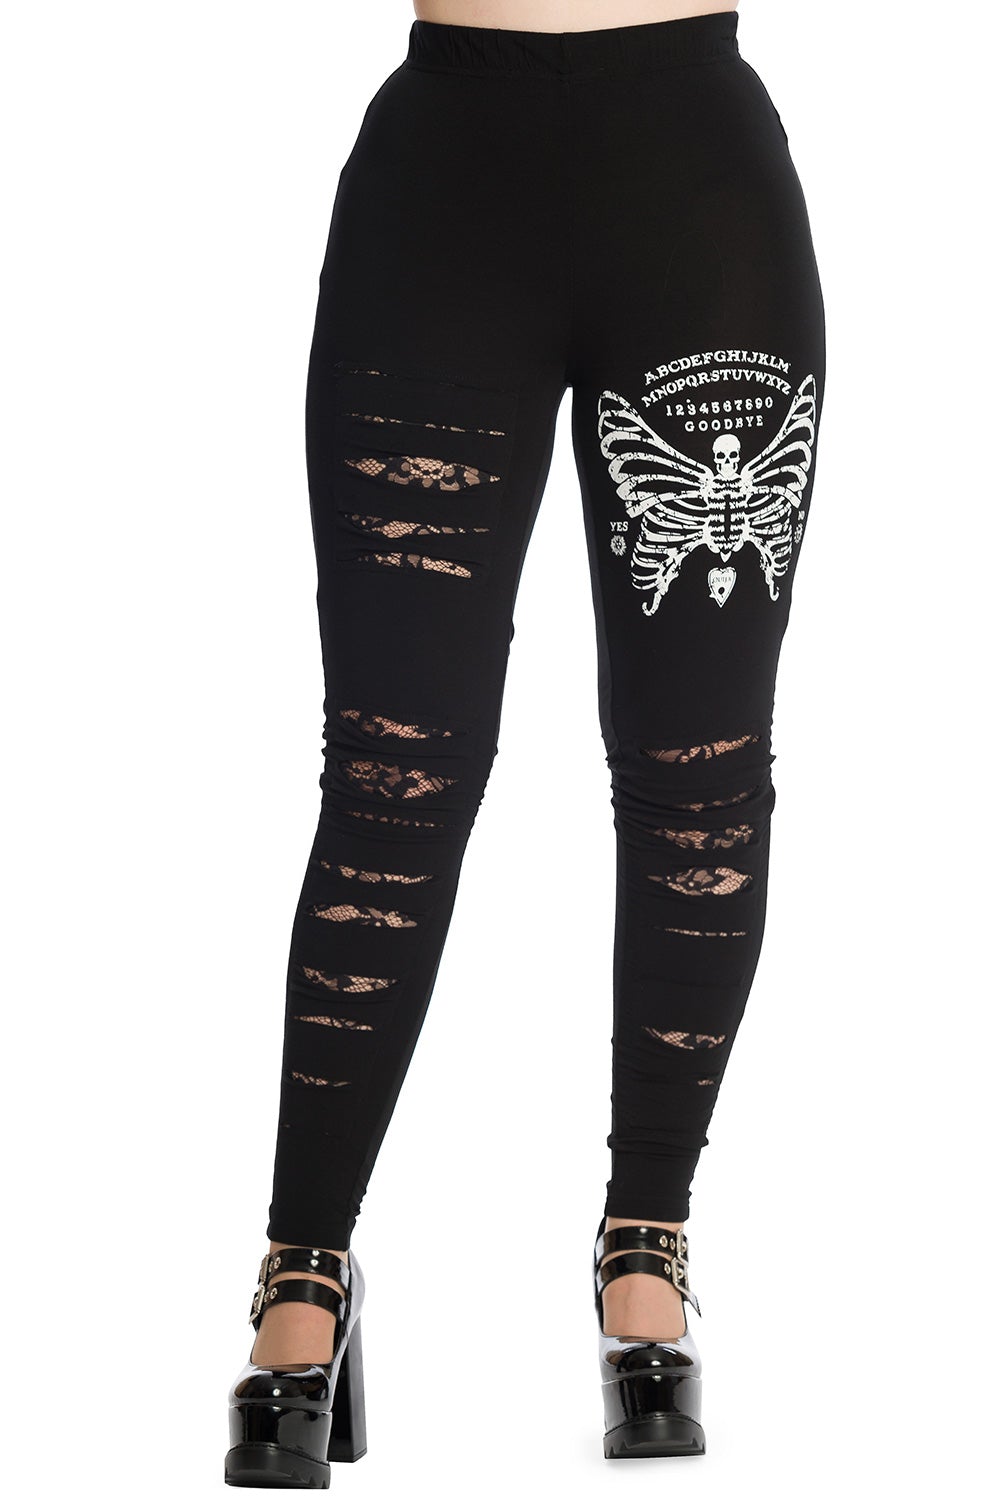 Black high waisted leggings with rips on both legs with lace underneath. Skeleton butterfly with ouija print on left thigh. 